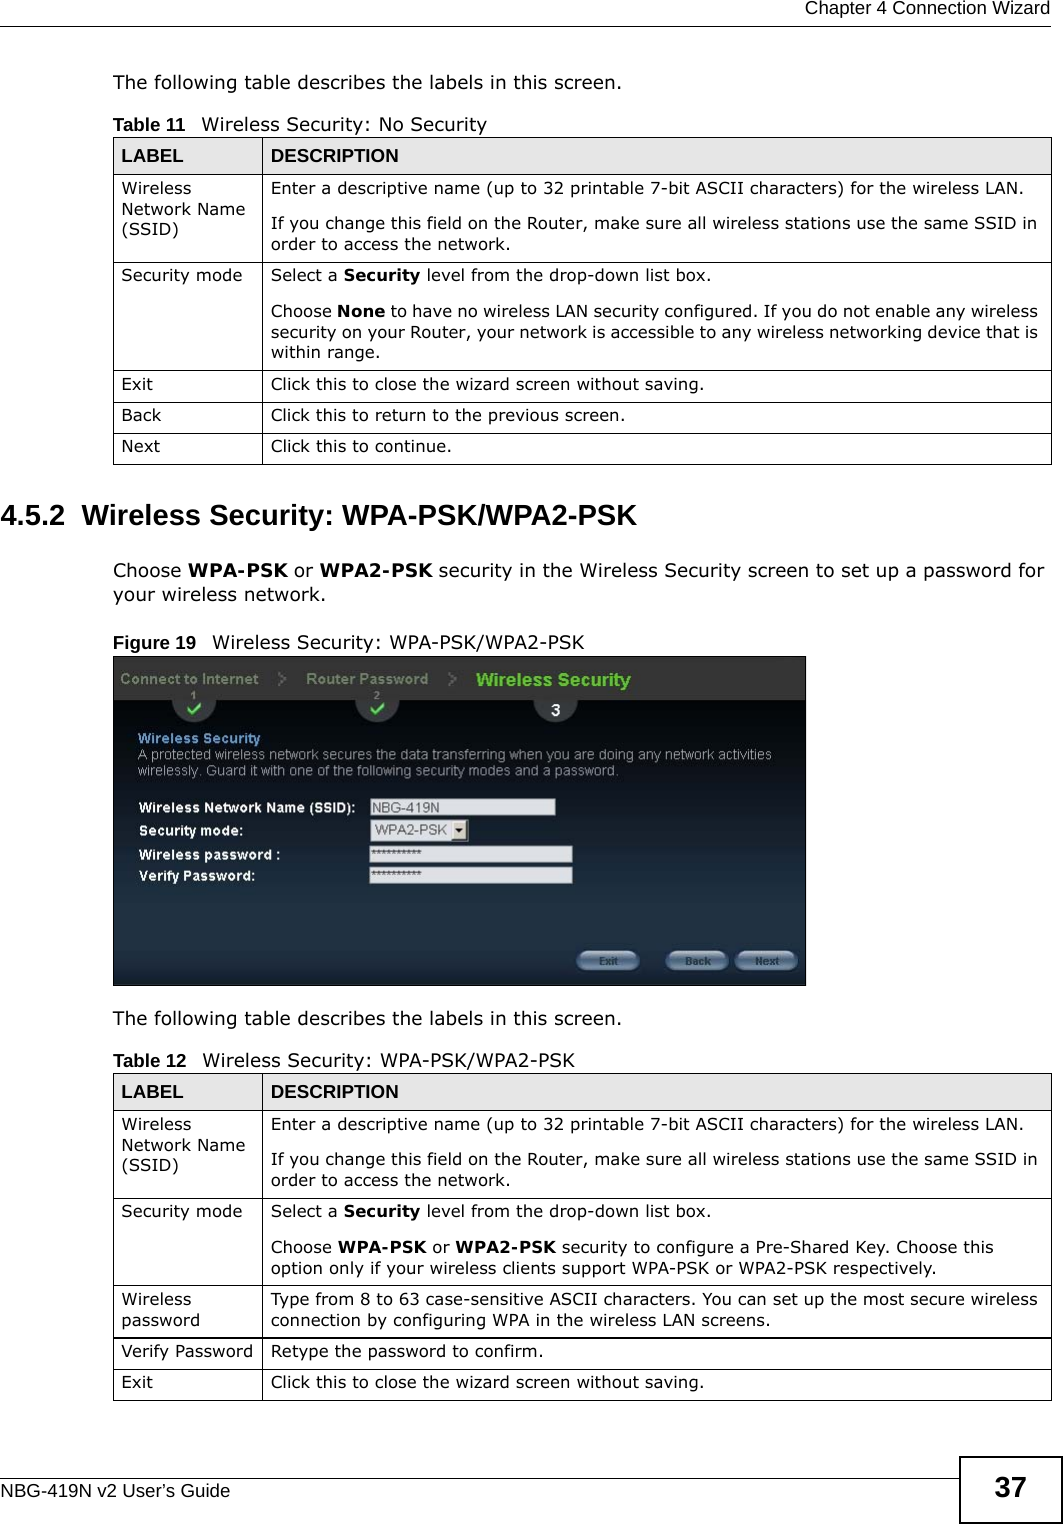  Chapter 4 Connection WizardNBG-419N v2 User’s Guide 37The following table describes the labels in this screen.4.5.2  Wireless Security: WPA-PSK/WPA2-PSKChoose WPA-PSK or WPA2-PSK security in the Wireless Security screen to set up a password for your wireless network.Figure 19   Wireless Security: WPA-PSK/WPA2-PSKThe following table describes the labels in this screen. Table 11   Wireless Security: No SecurityLABEL DESCRIPTIONWireless Network Name (SSID)Enter a descriptive name (up to 32 printable 7-bit ASCII characters) for the wireless LAN. If you change this field on the Router, make sure all wireless stations use the same SSID in order to access the network. Security mode Select a Security level from the drop-down list box. Choose None to have no wireless LAN security configured. If you do not enable any wireless security on your Router, your network is accessible to any wireless networking device that is within range. Exit Click this to close the wizard screen without saving.Back Click this to return to the previous screen.Next Click this to continue. Table 12   Wireless Security: WPA-PSK/WPA2-PSKLABEL DESCRIPTIONWireless Network Name (SSID)Enter a descriptive name (up to 32 printable 7-bit ASCII characters) for the wireless LAN. If you change this field on the Router, make sure all wireless stations use the same SSID in order to access the network. Security mode Select a Security level from the drop-down list box.Choose WPA-PSK or WPA2-PSK security to configure a Pre-Shared Key. Choose this option only if your wireless clients support WPA-PSK or WPA2-PSK respectively.Wireless passwordType from 8 to 63 case-sensitive ASCII characters. You can set up the most secure wireless connection by configuring WPA in the wireless LAN screens.Verify Password Retype the password to confirm.Exit Click this to close the wizard screen without saving.